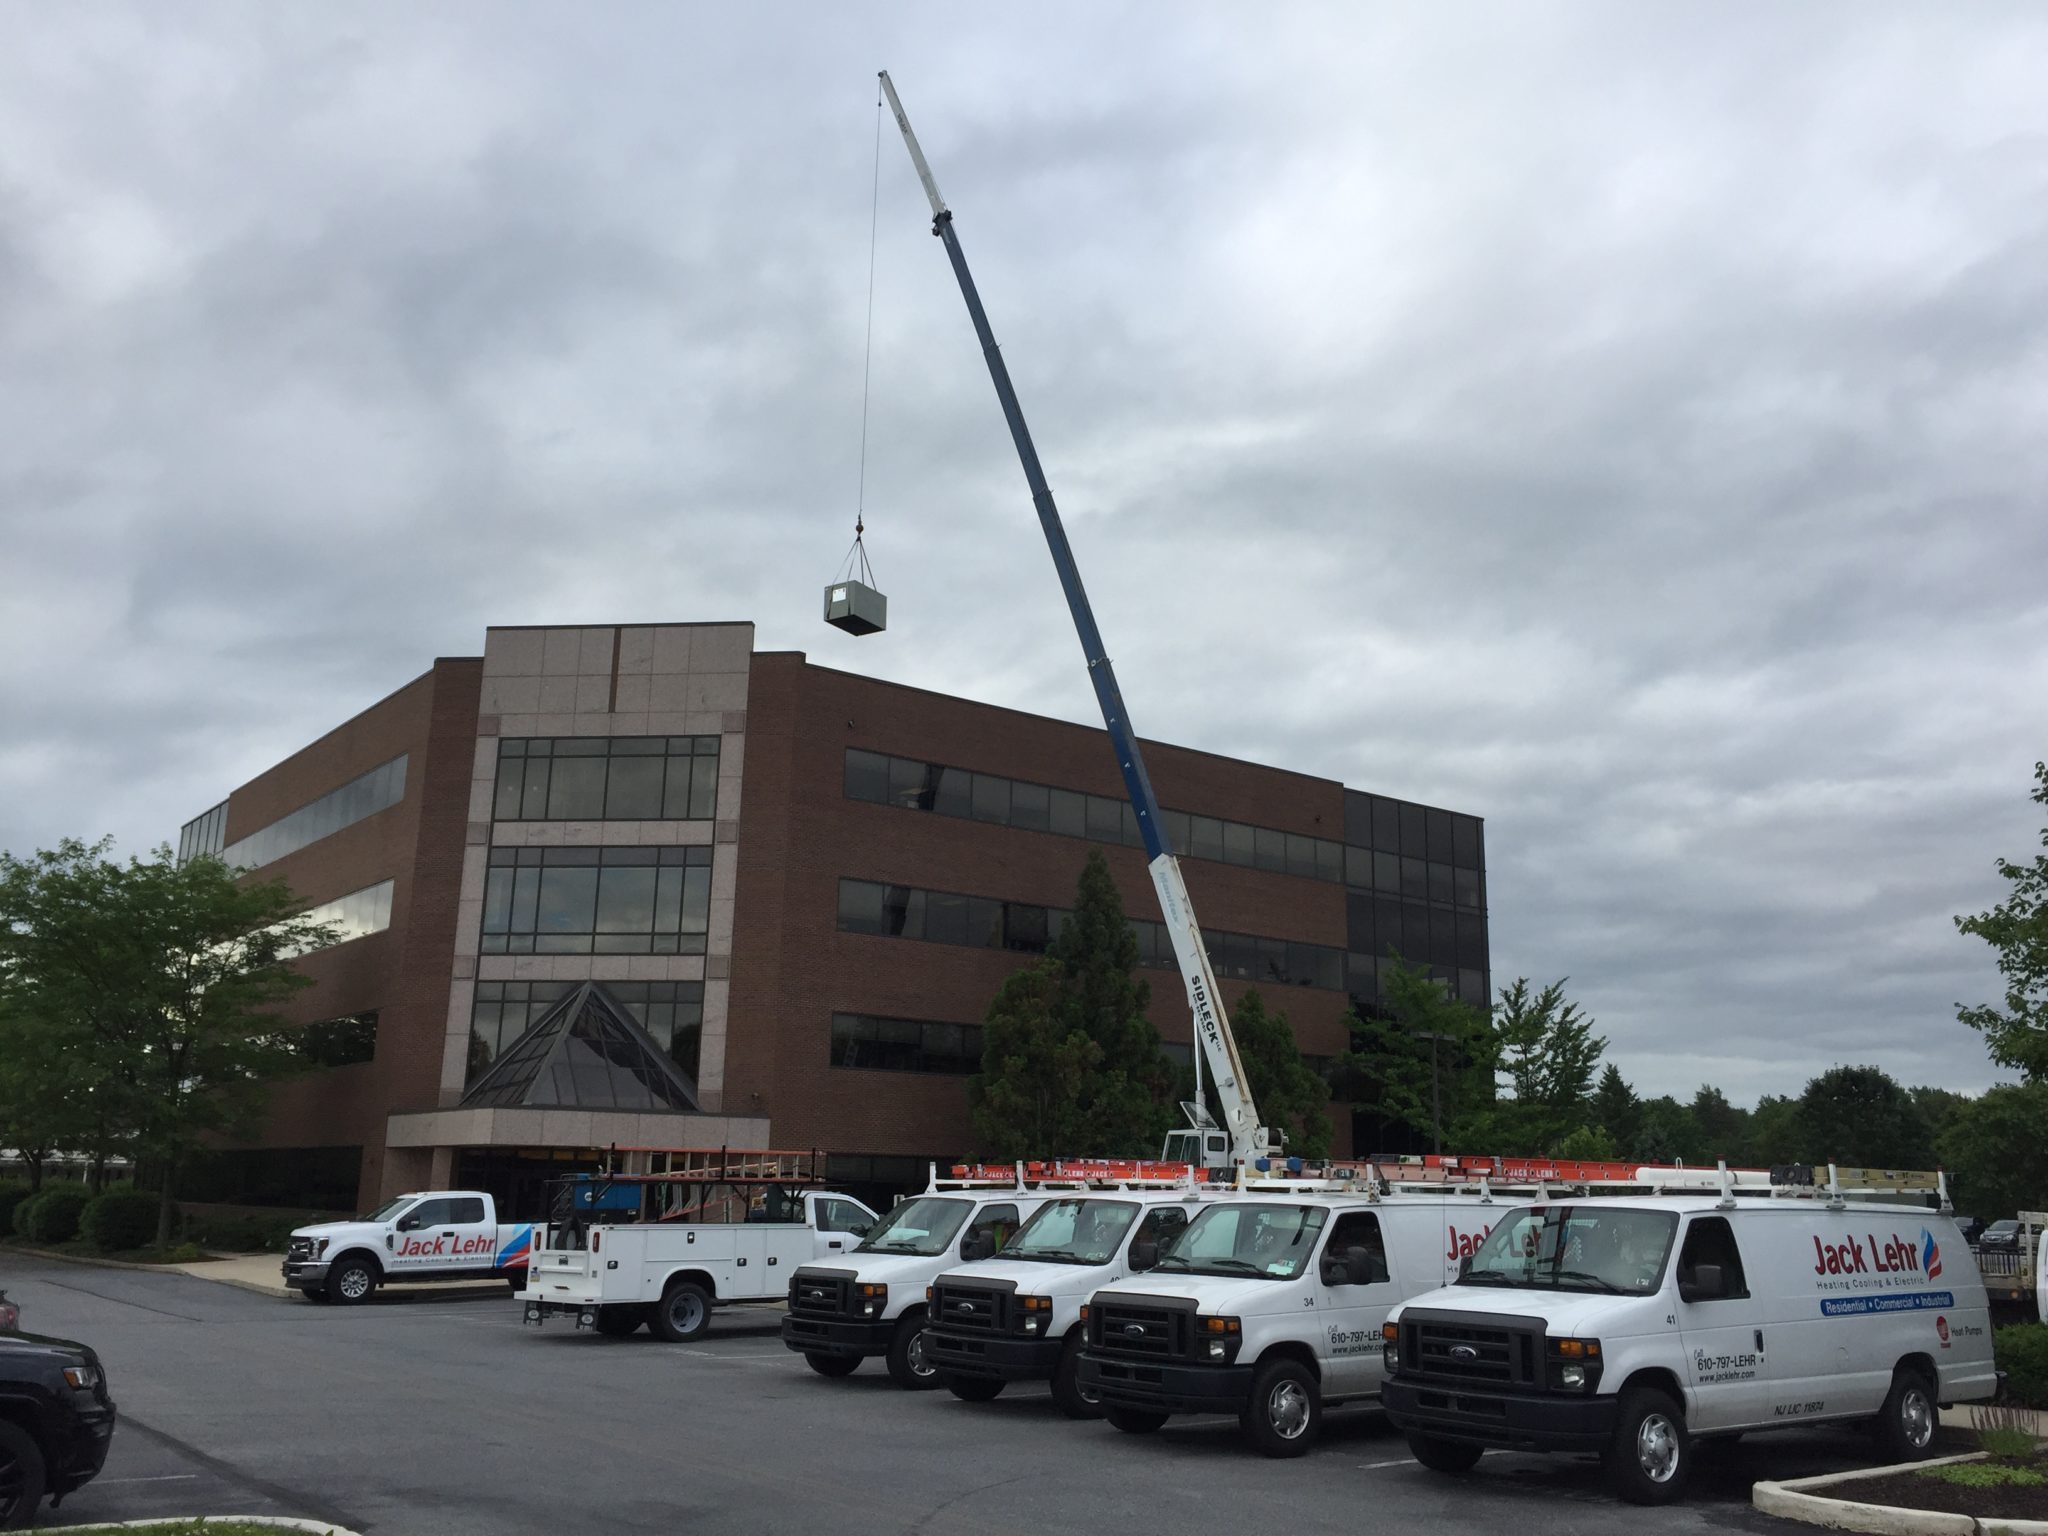 Commercial hvac installation in allentown pa 